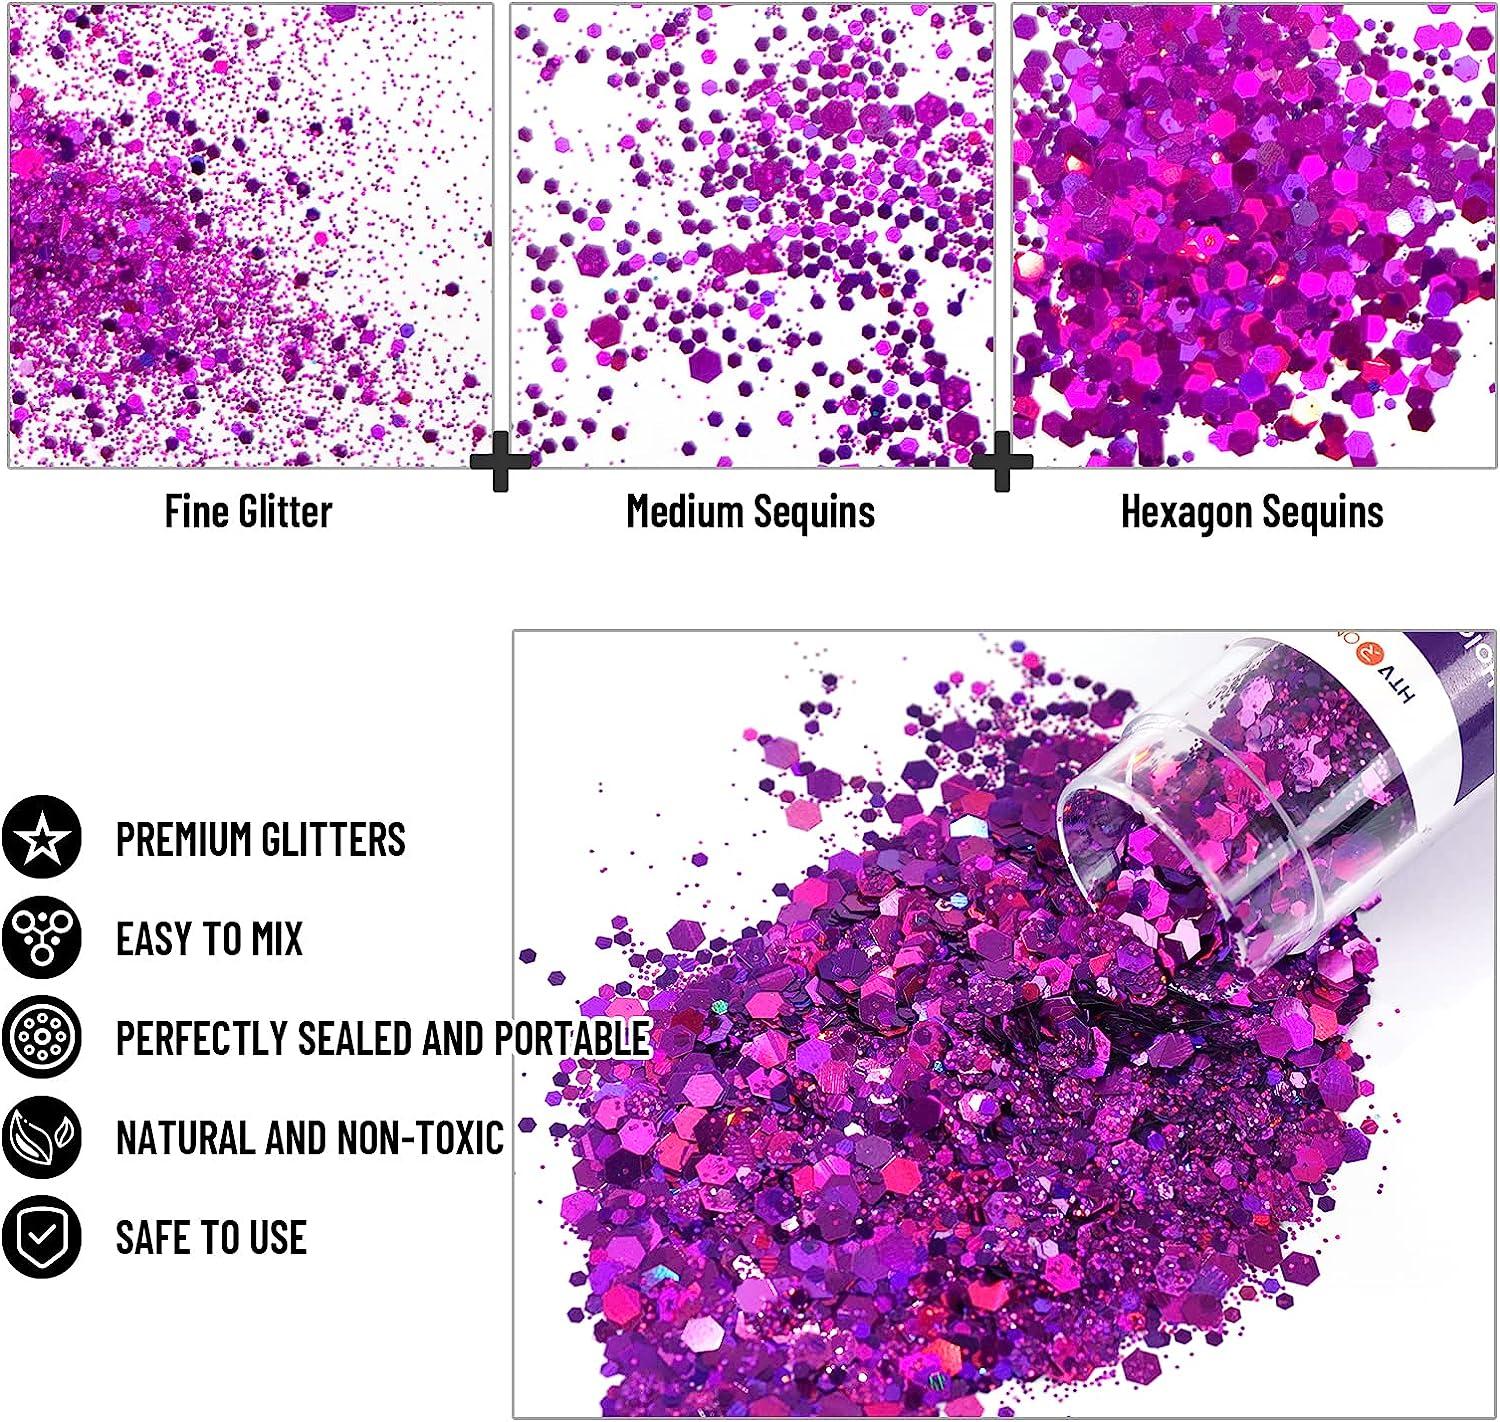 Holographic Chunky Glitter, 15 Colors Craft Glitter for Resin